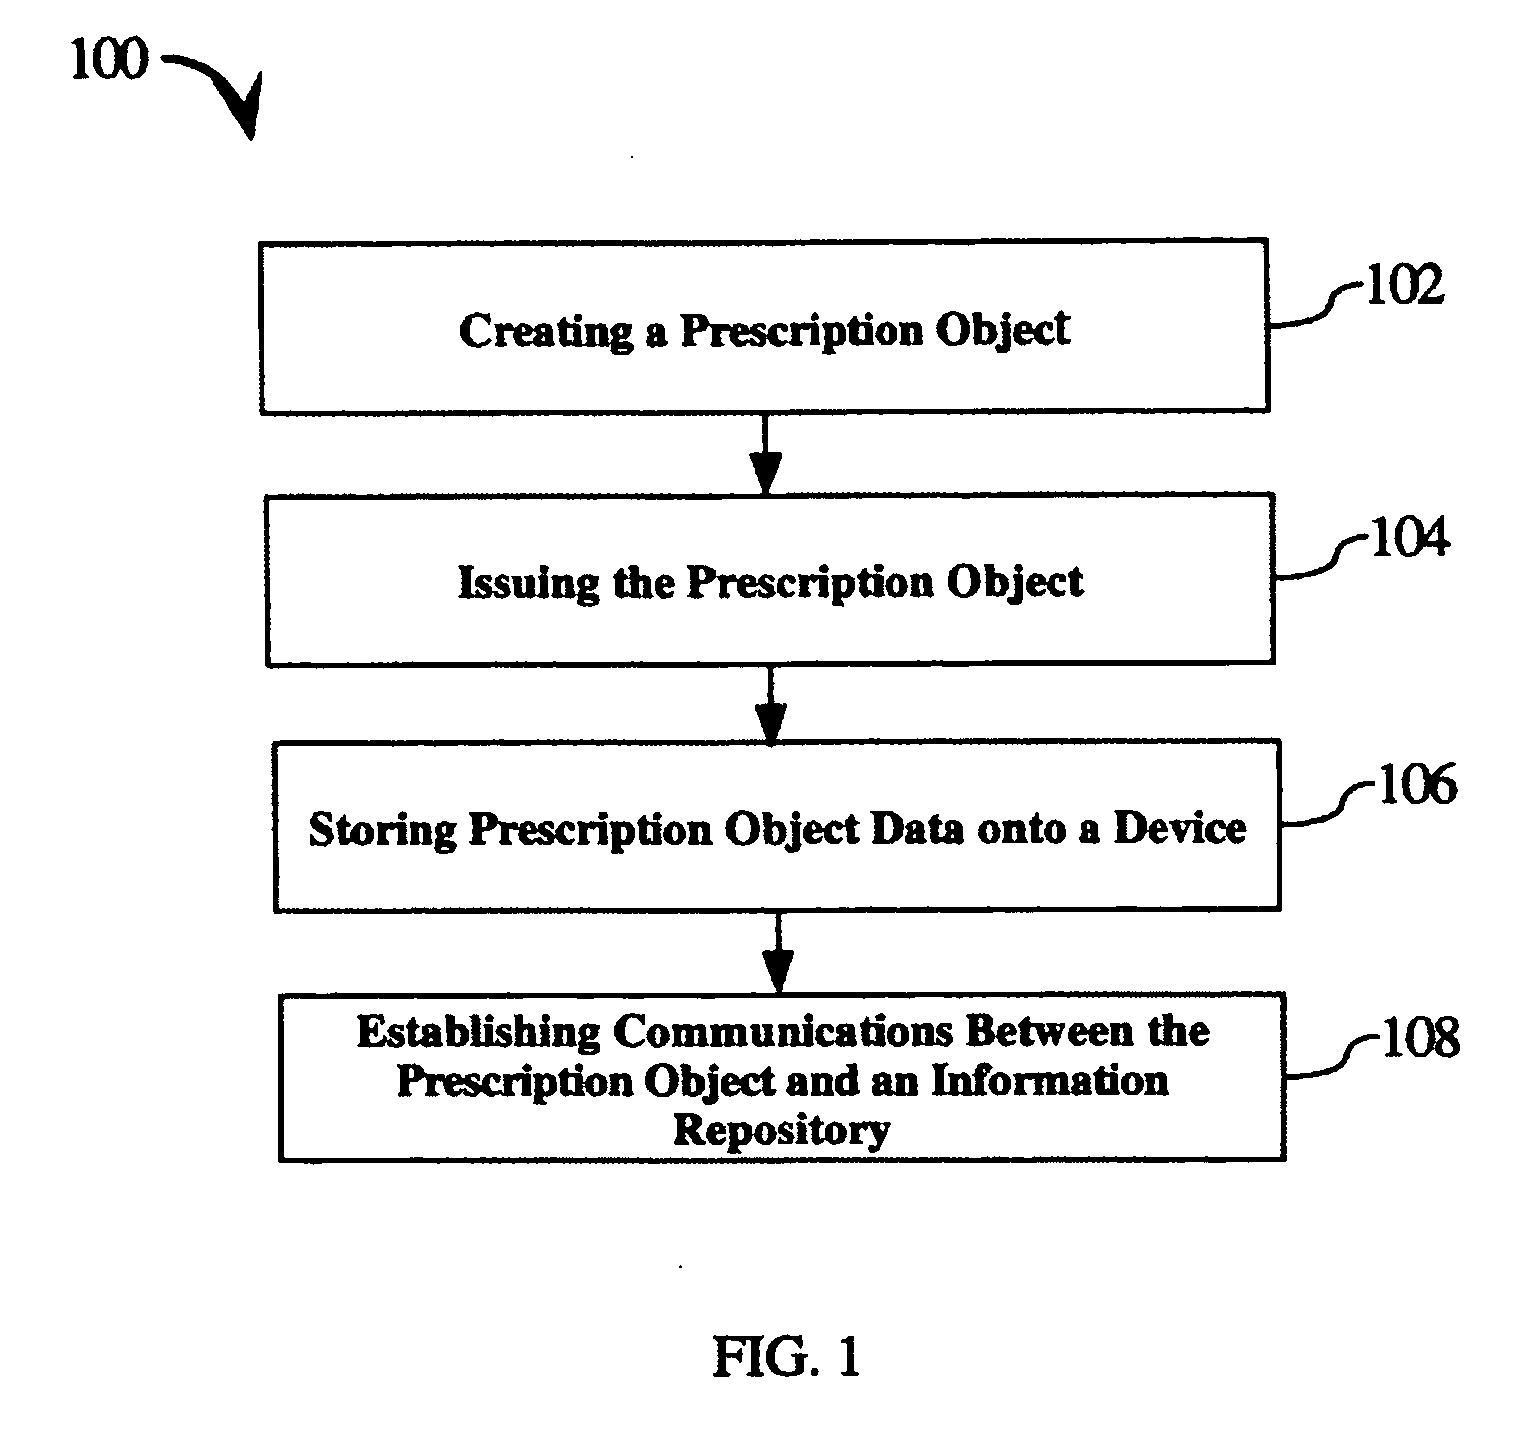 Application of an electronic prescription object to food preparation